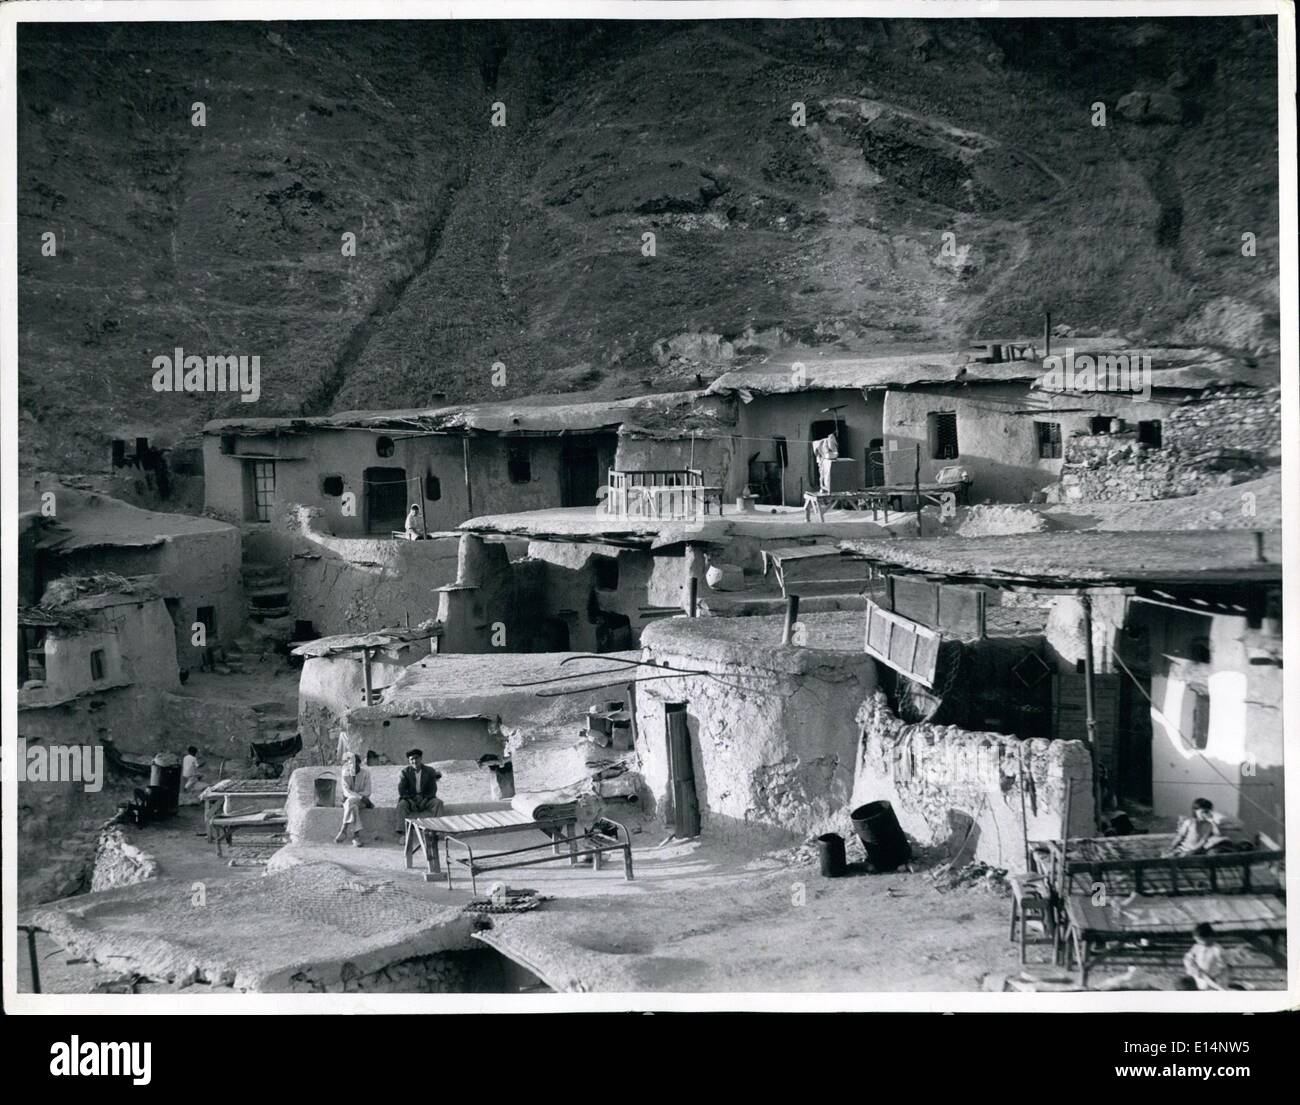 Apr. 18, 2012 - How the Persians Lived Before Anglo - Iranian Re-Housed they : Old type Iranian Peasants houses which disappeared when Anglo - Iranian's housing schee was completed. The Iranian workers moved into modern well-furnished houses and taught to appreciate the amenities of the western way of life. Stock Photo